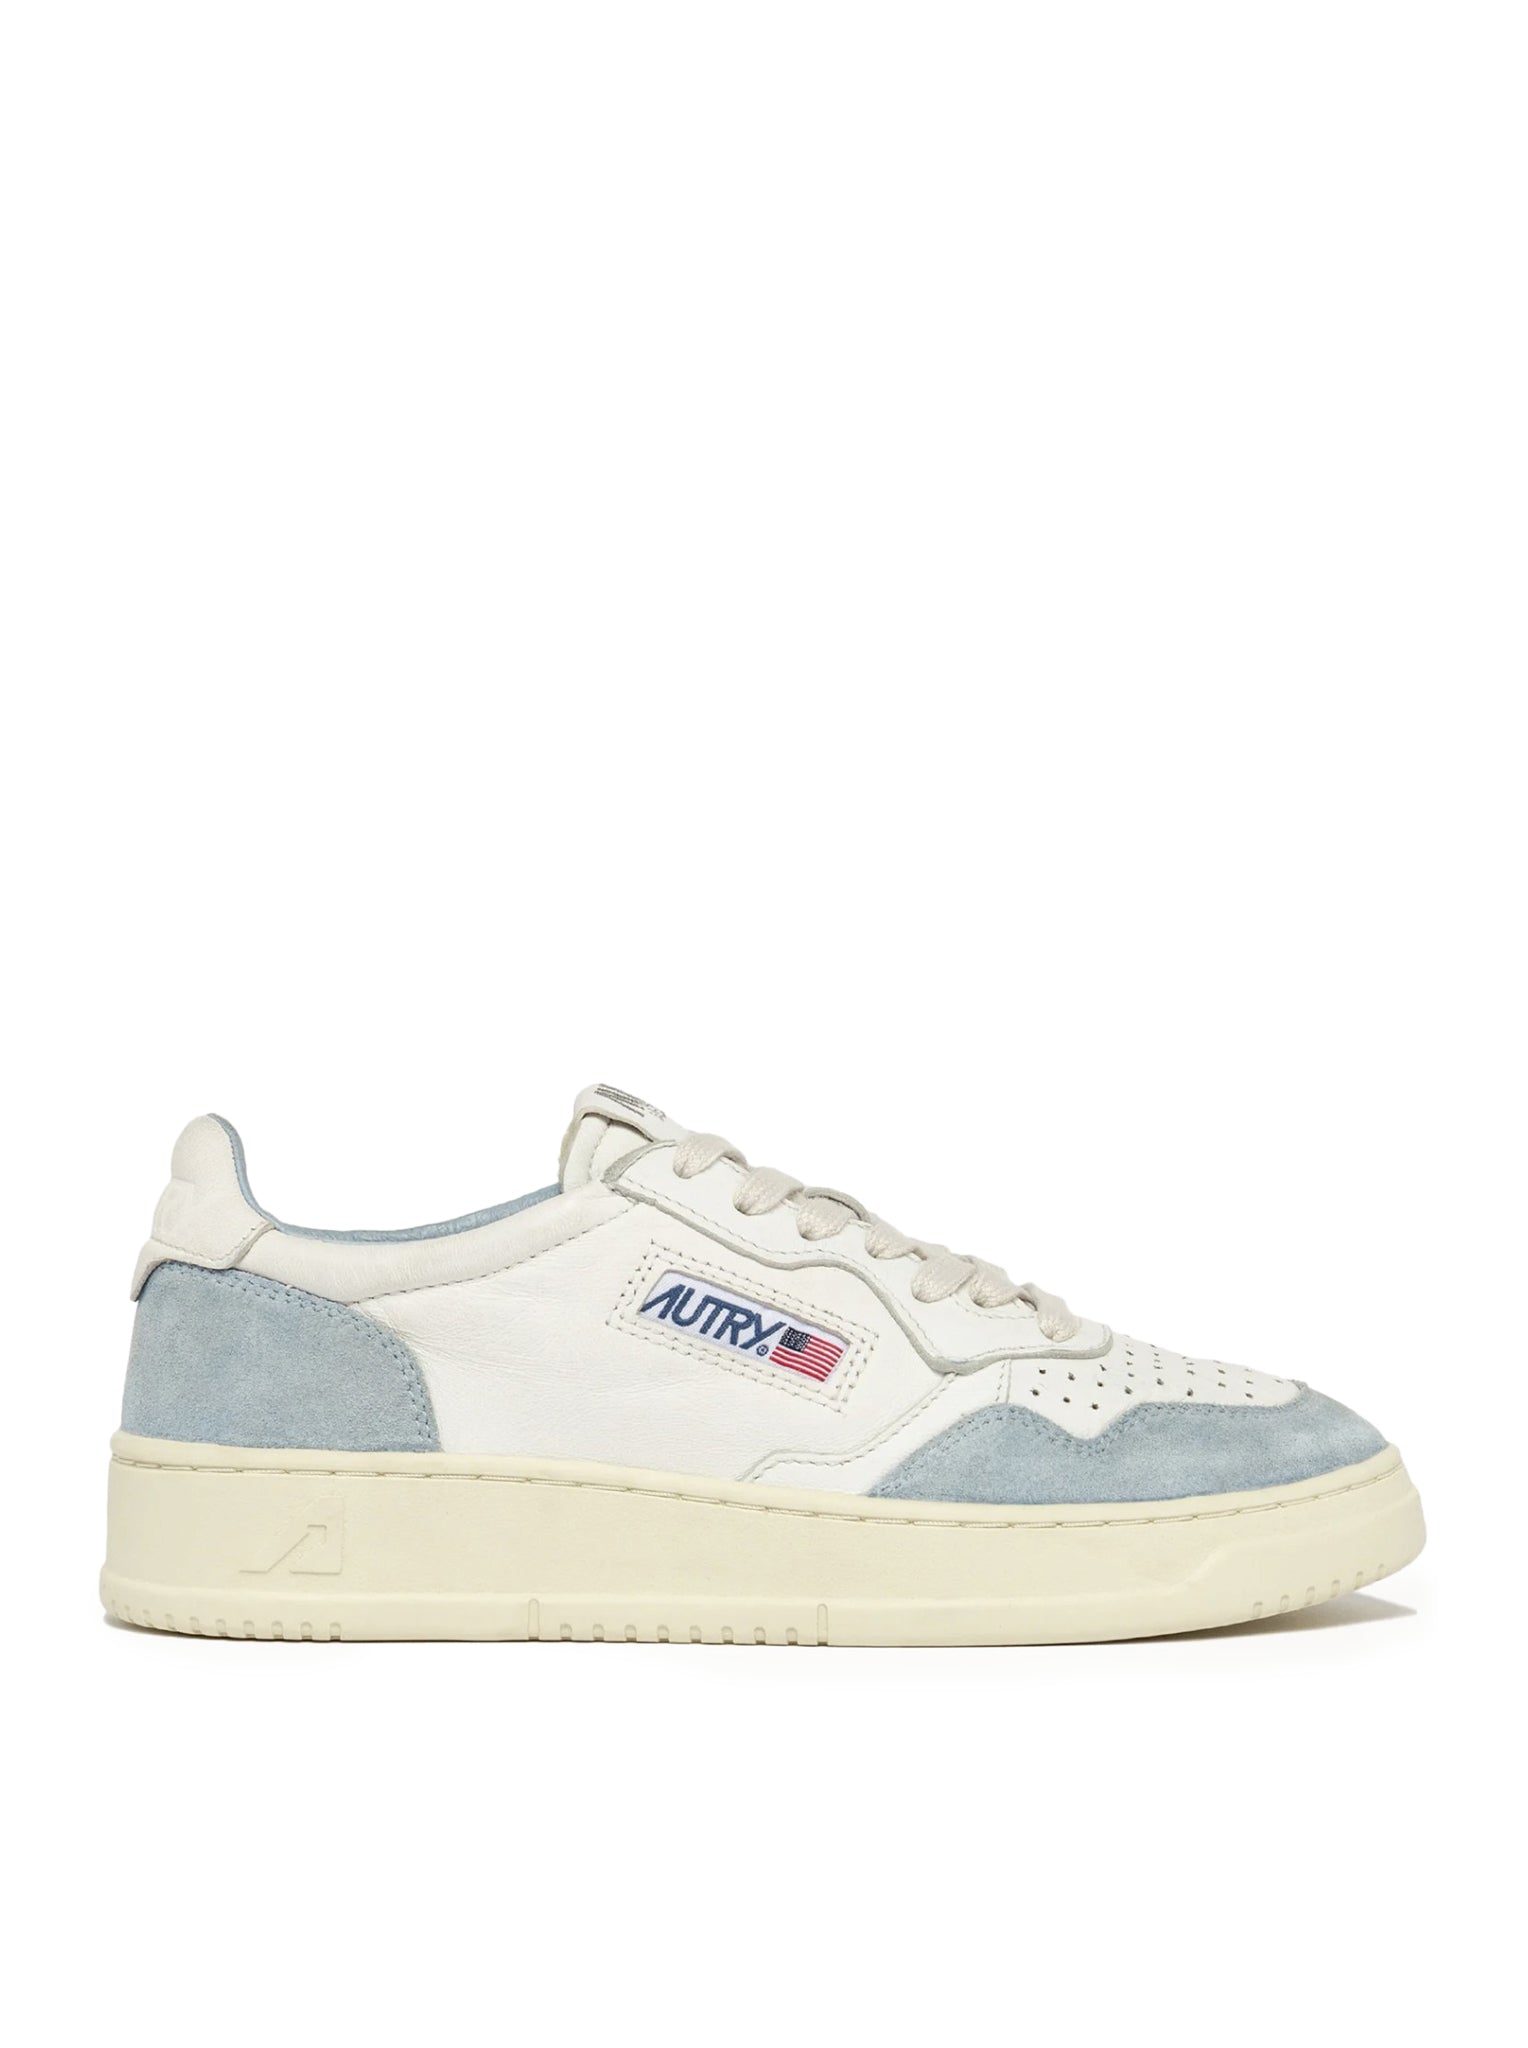 MEDALIST LOW SNEAKERS IN WHITE GOAT LEATHER AND LIGHT BLUE SUEDE